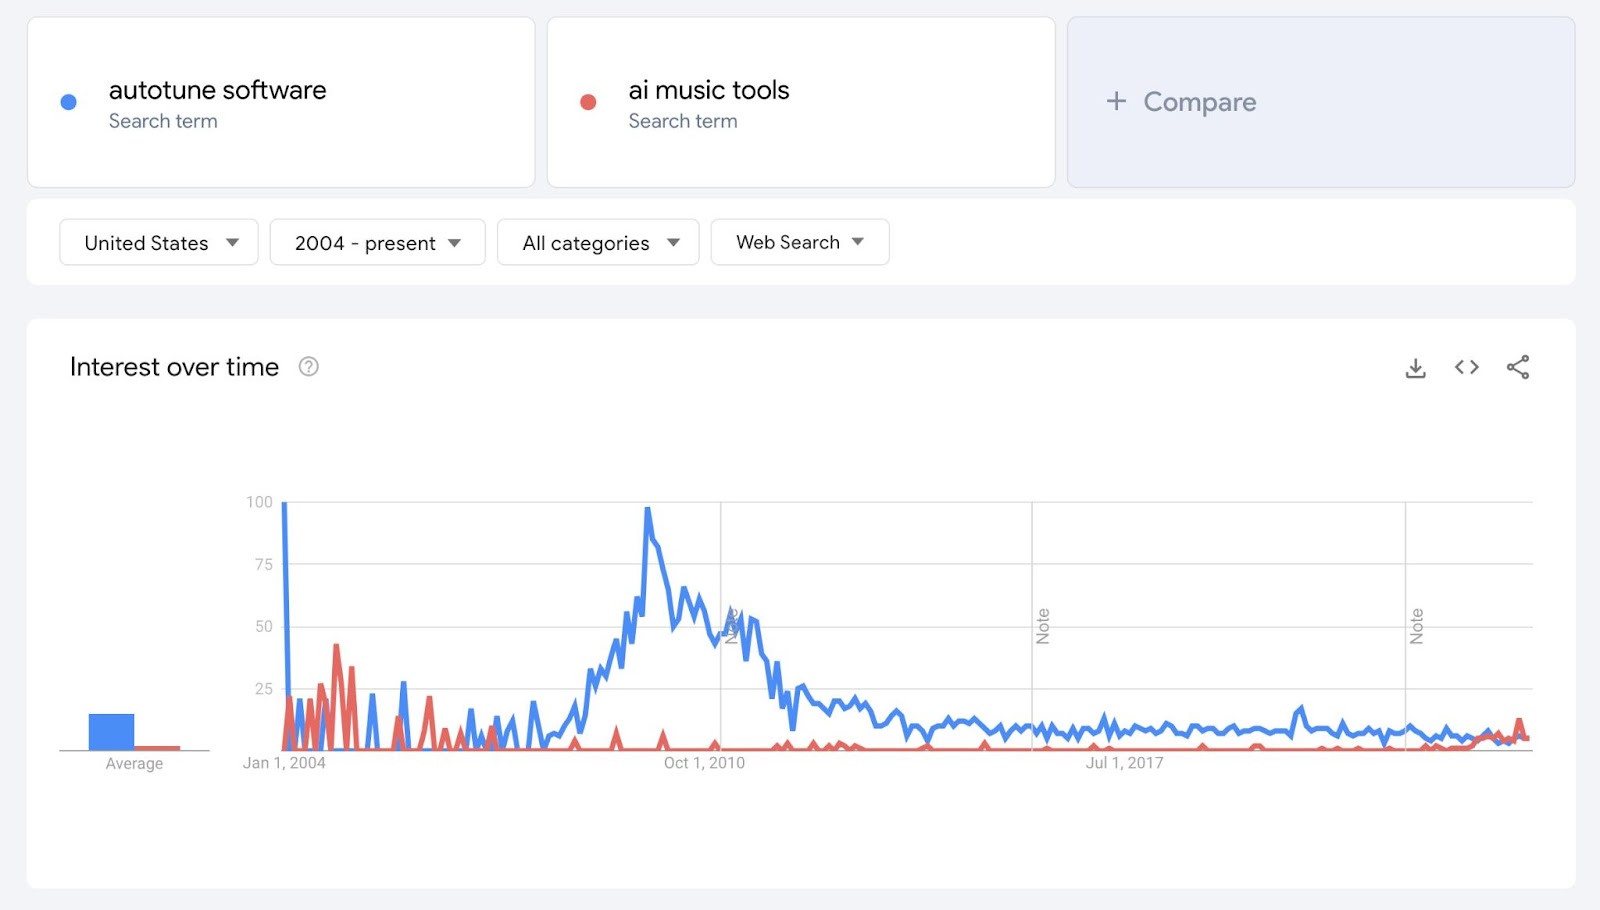 ALT: comparison of autotune software and AI music tools on Google Trends